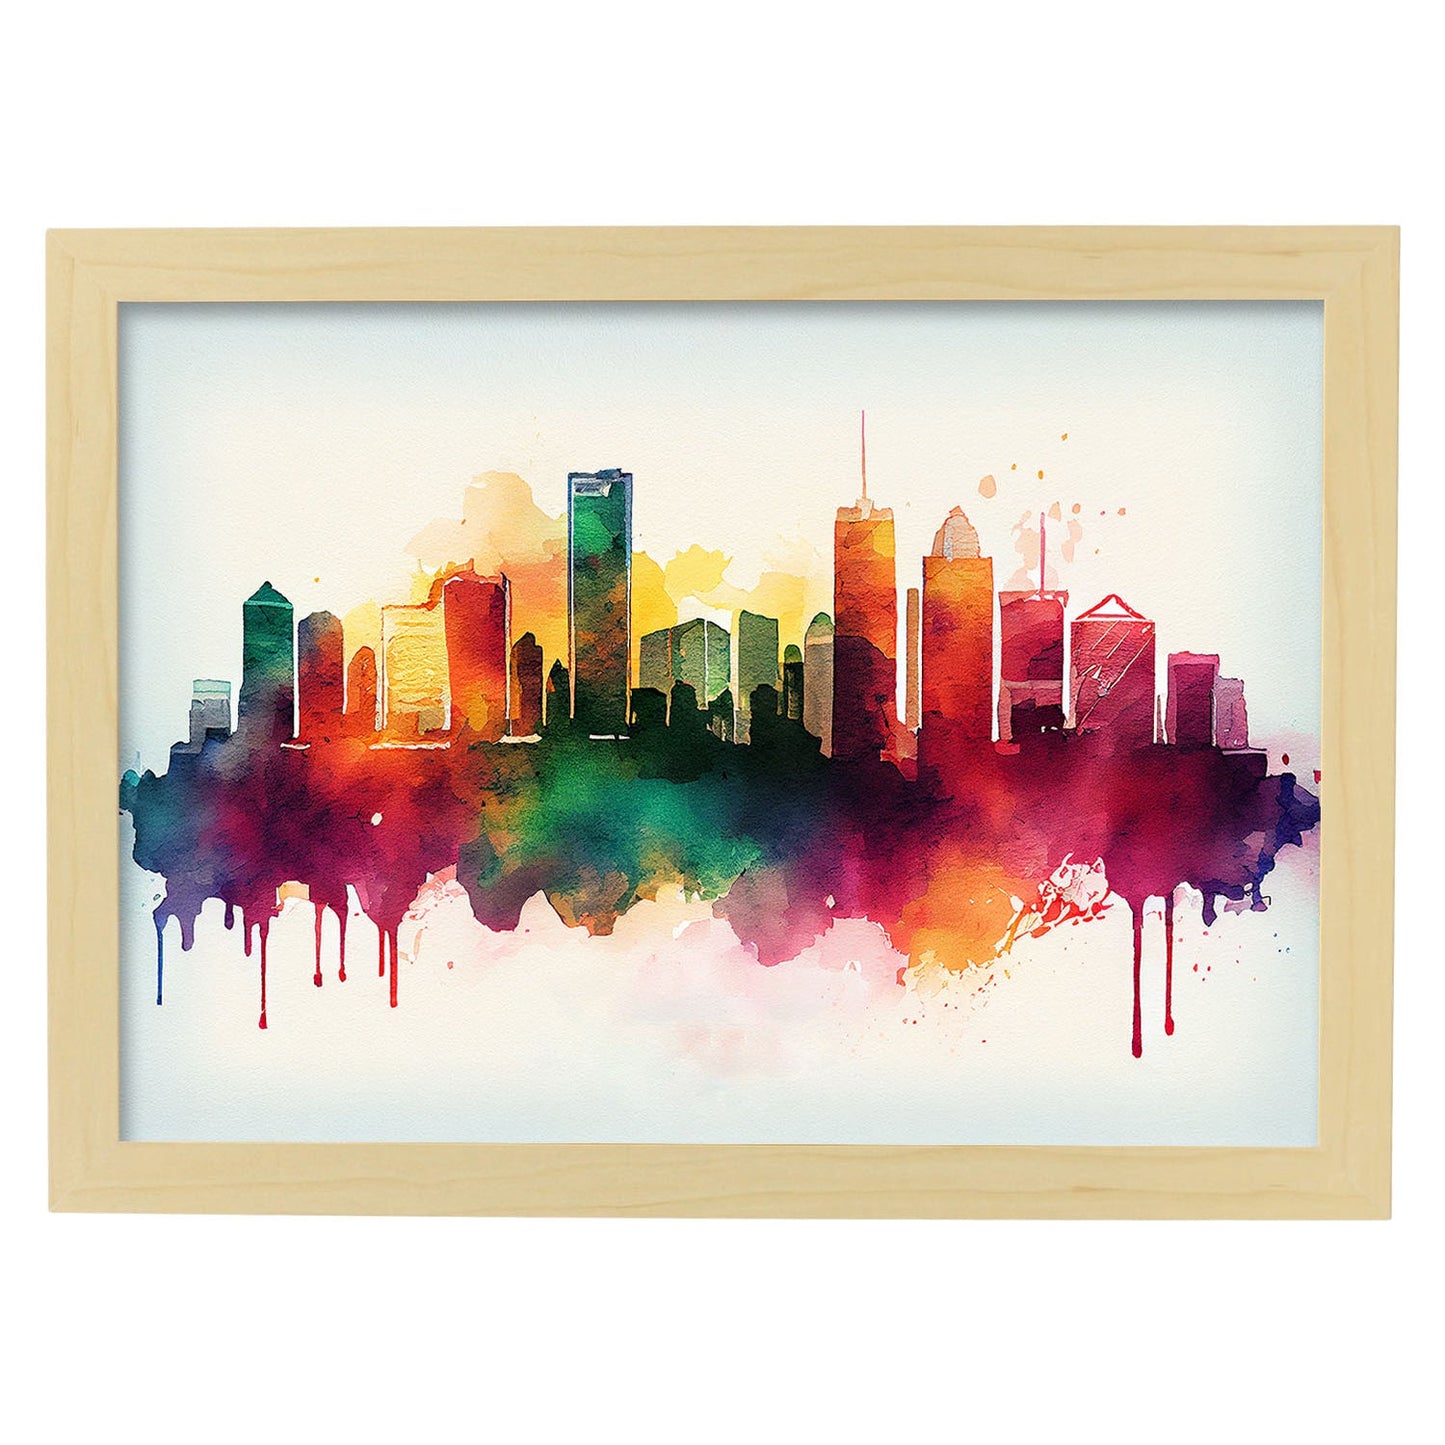 Nacnic watercolor of a skyline of the city of Miami_2. Aesthetic Wall Art Prints for Bedroom or Living Room Design.-Artwork-Nacnic-A4-Marco Madera Clara-Nacnic Estudio SL